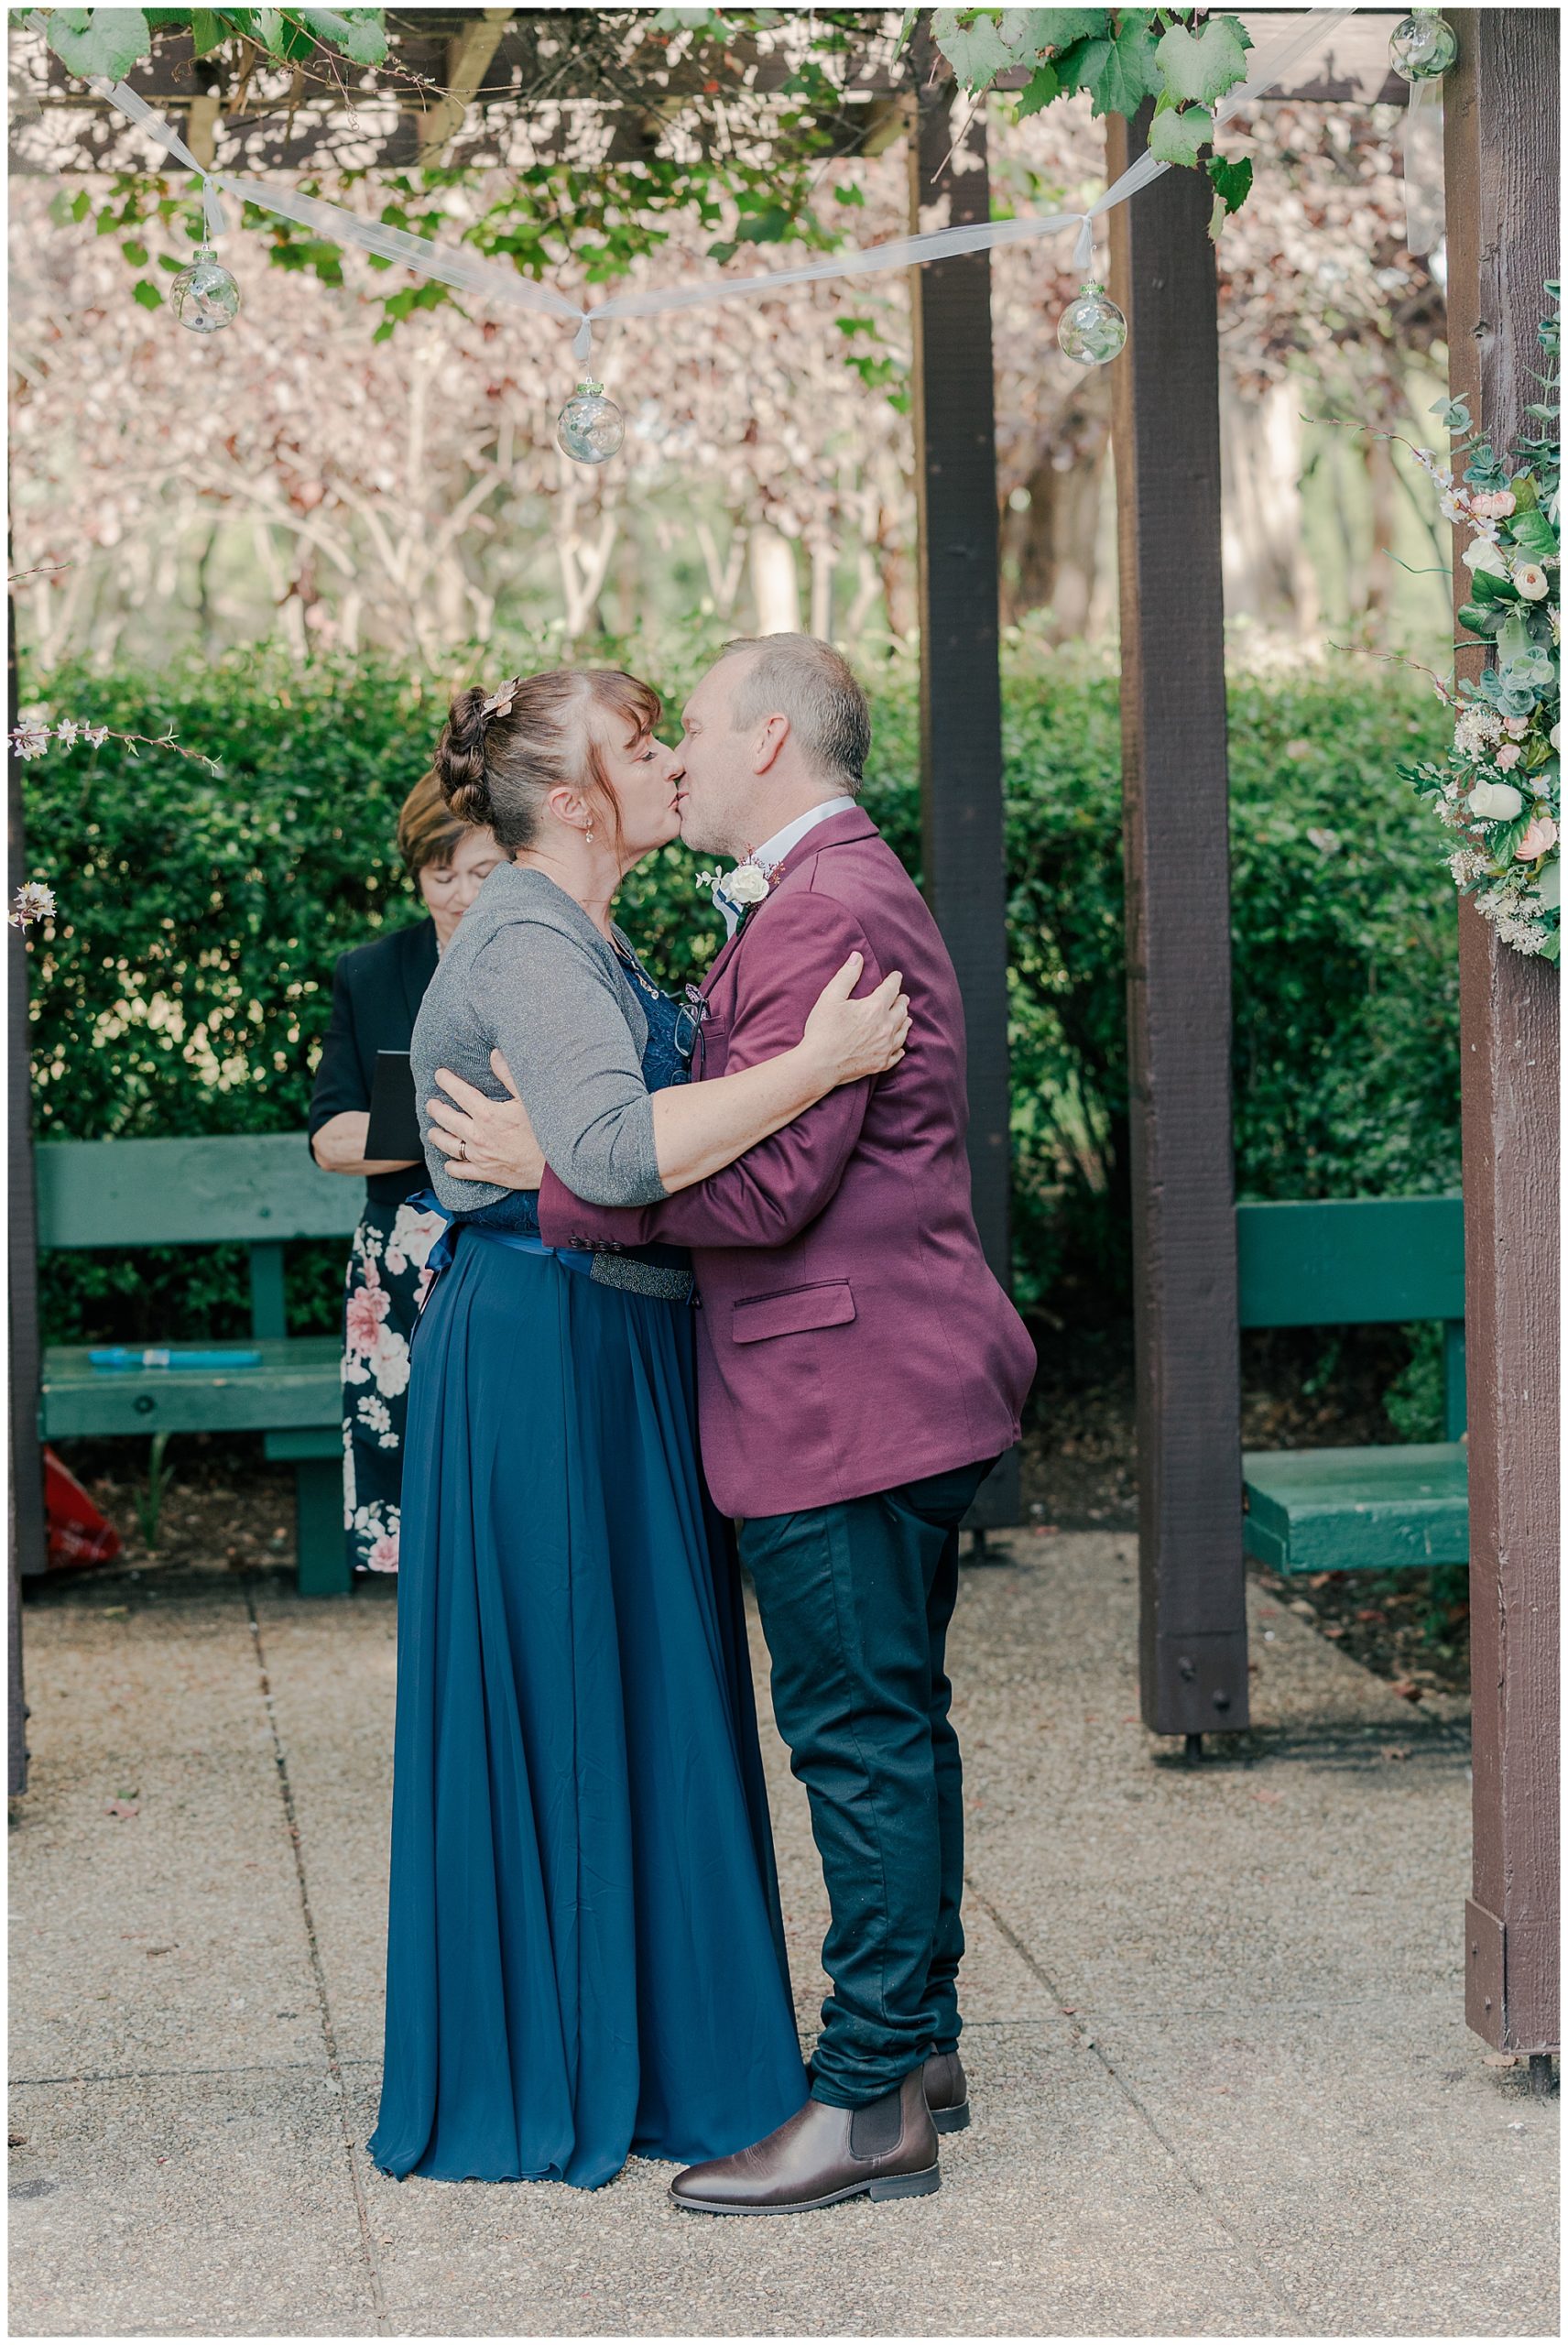 Canberra wedding photographer capture a lovely kiss between a bride and groom